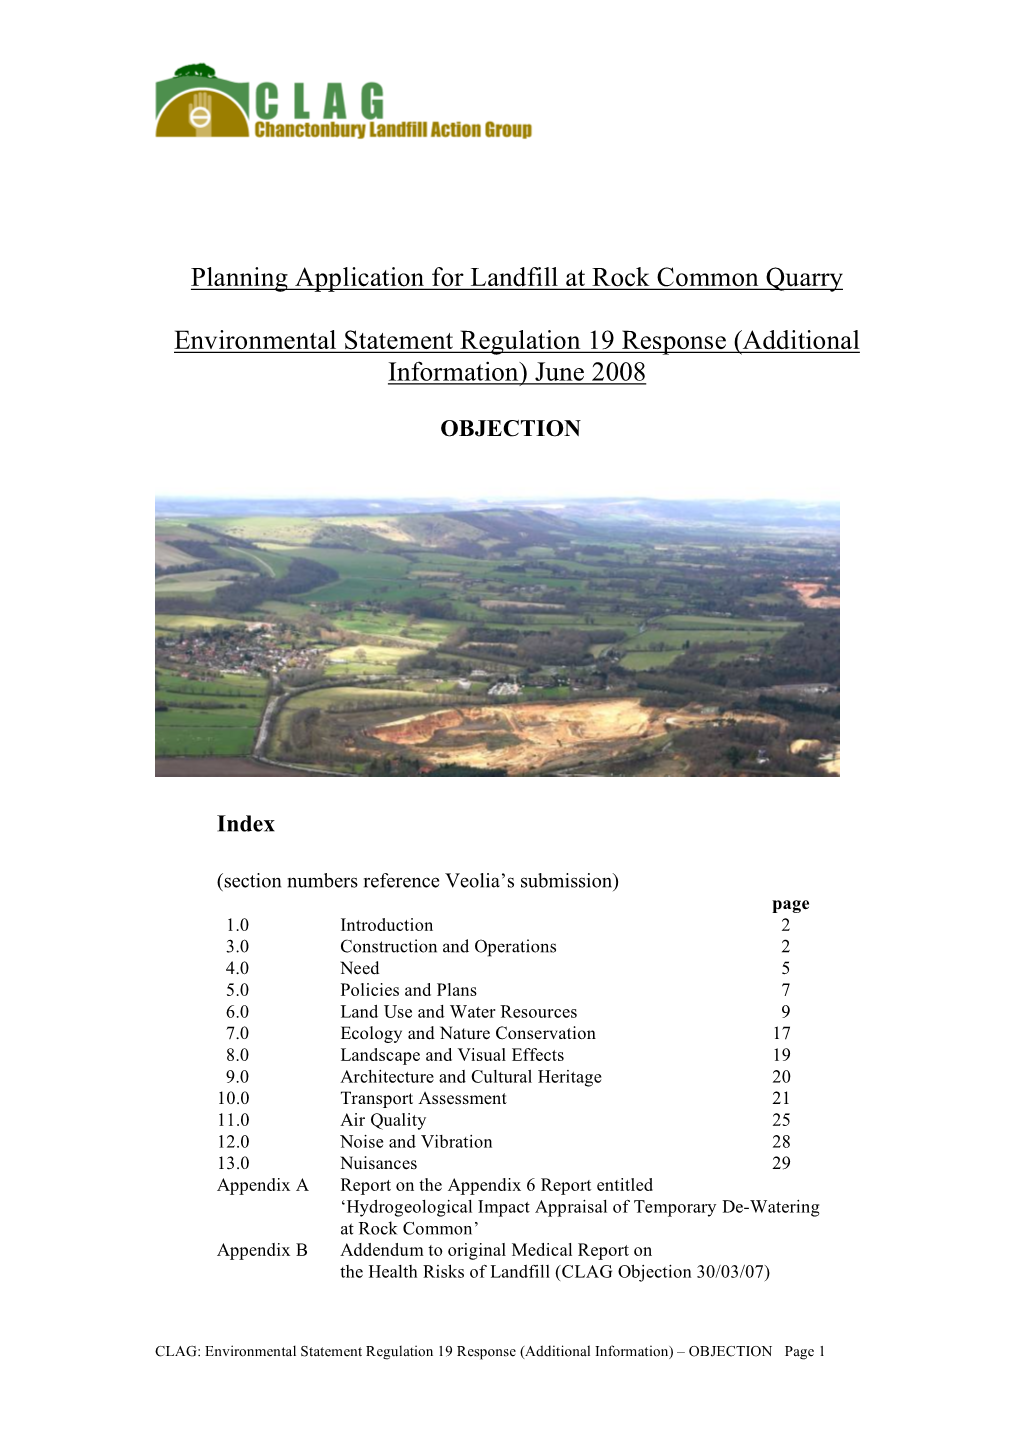 Planning Application for Landfill at Rock Common Quarry